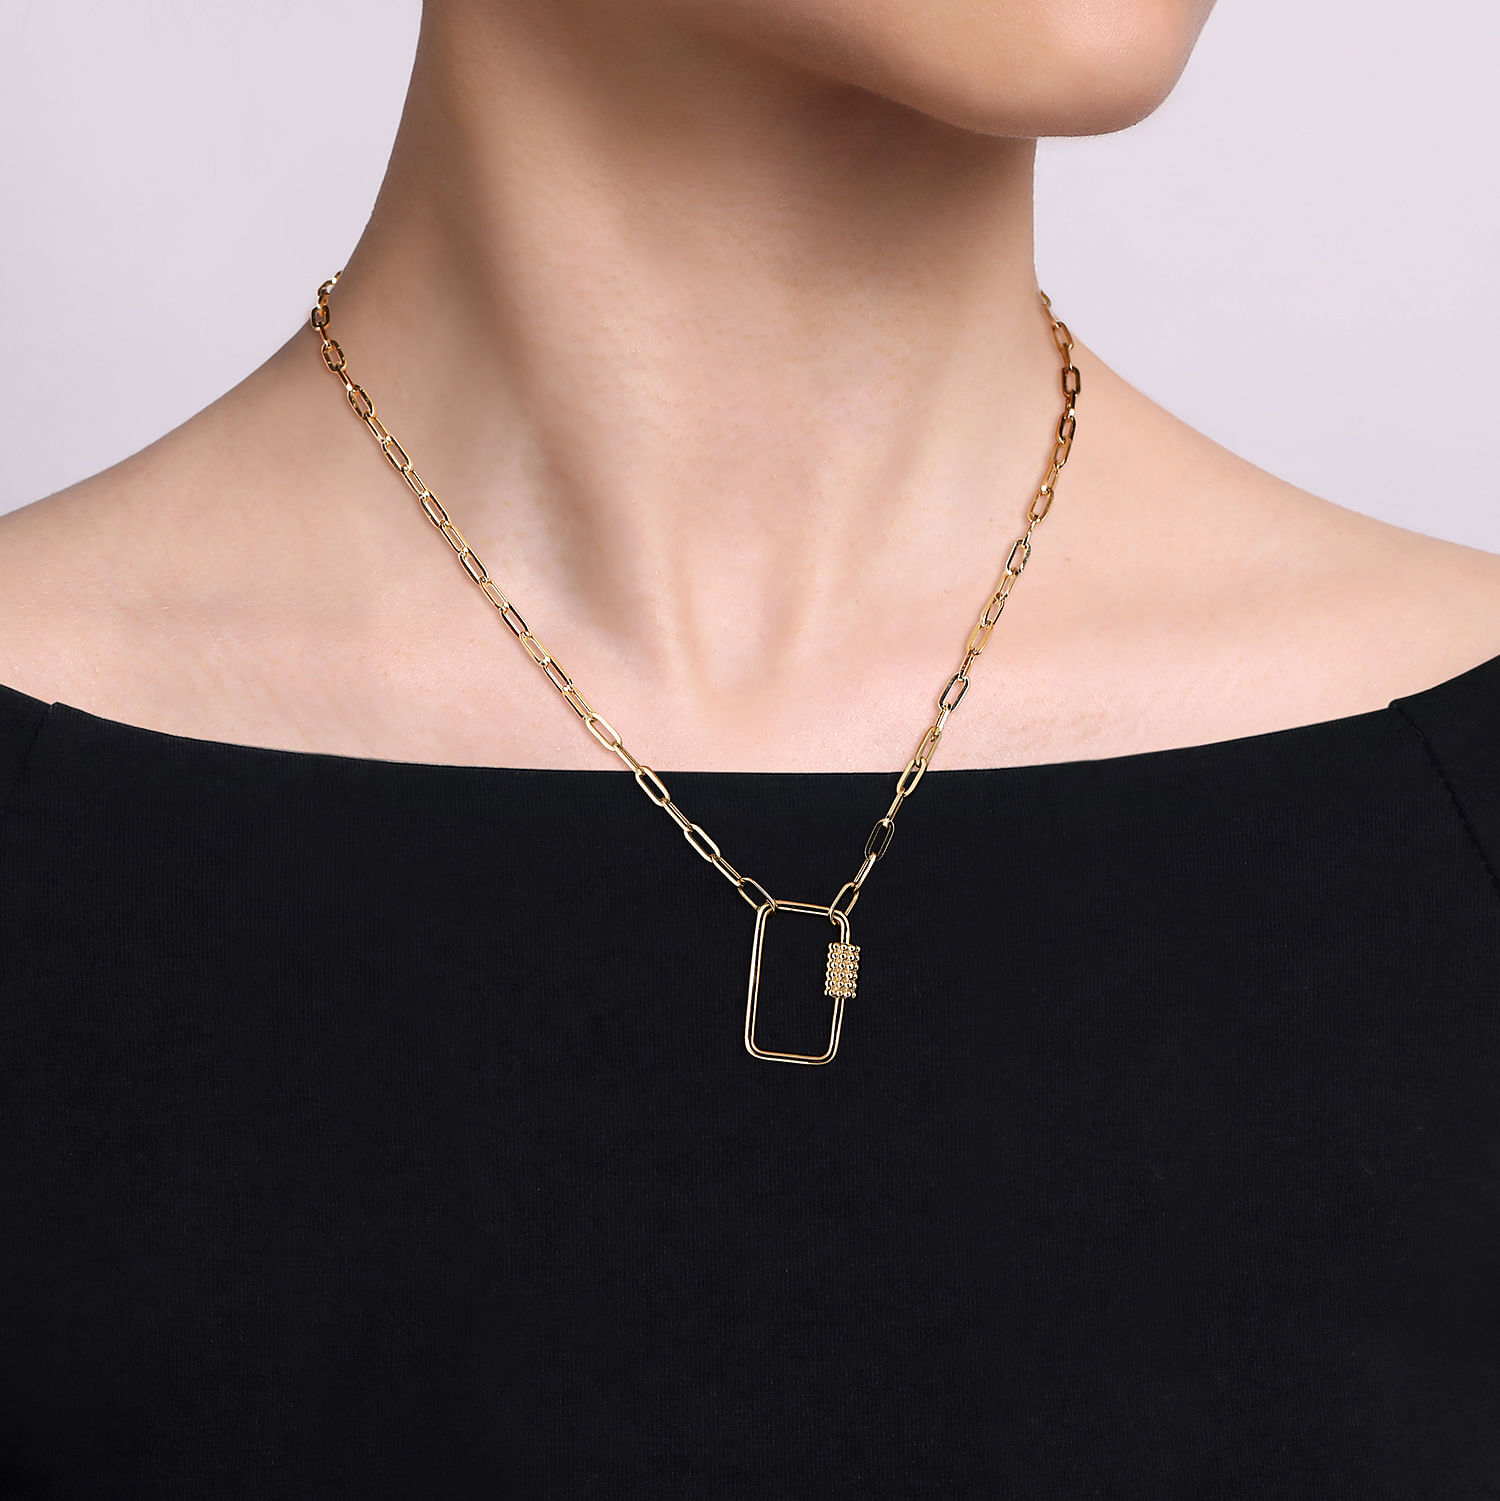 14K Yellow Gold Bujukan Carabiner  Lock Necklace with Hollow Paperclip Chain